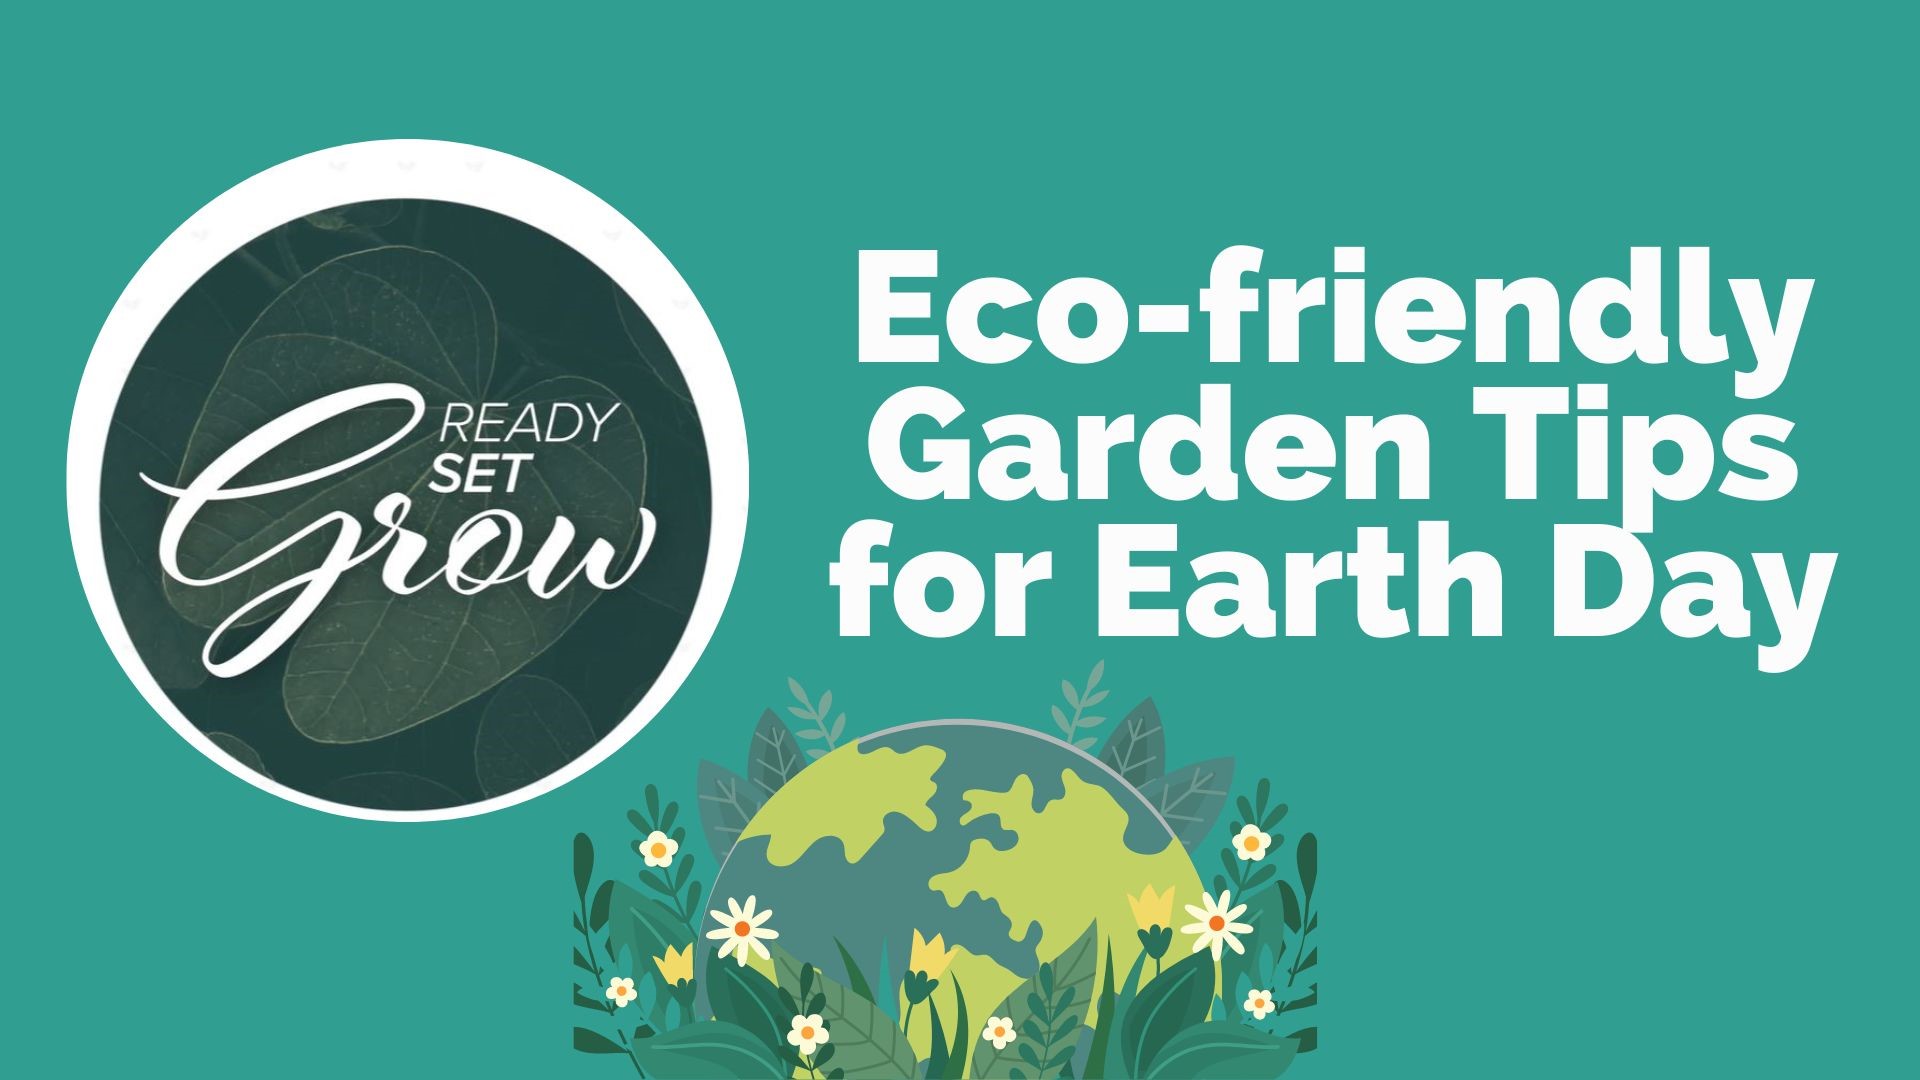 Earth Day is all about raising awareness about protecting our environment. Tips for how to make your yard and garden more sustainable and eco-friendly.